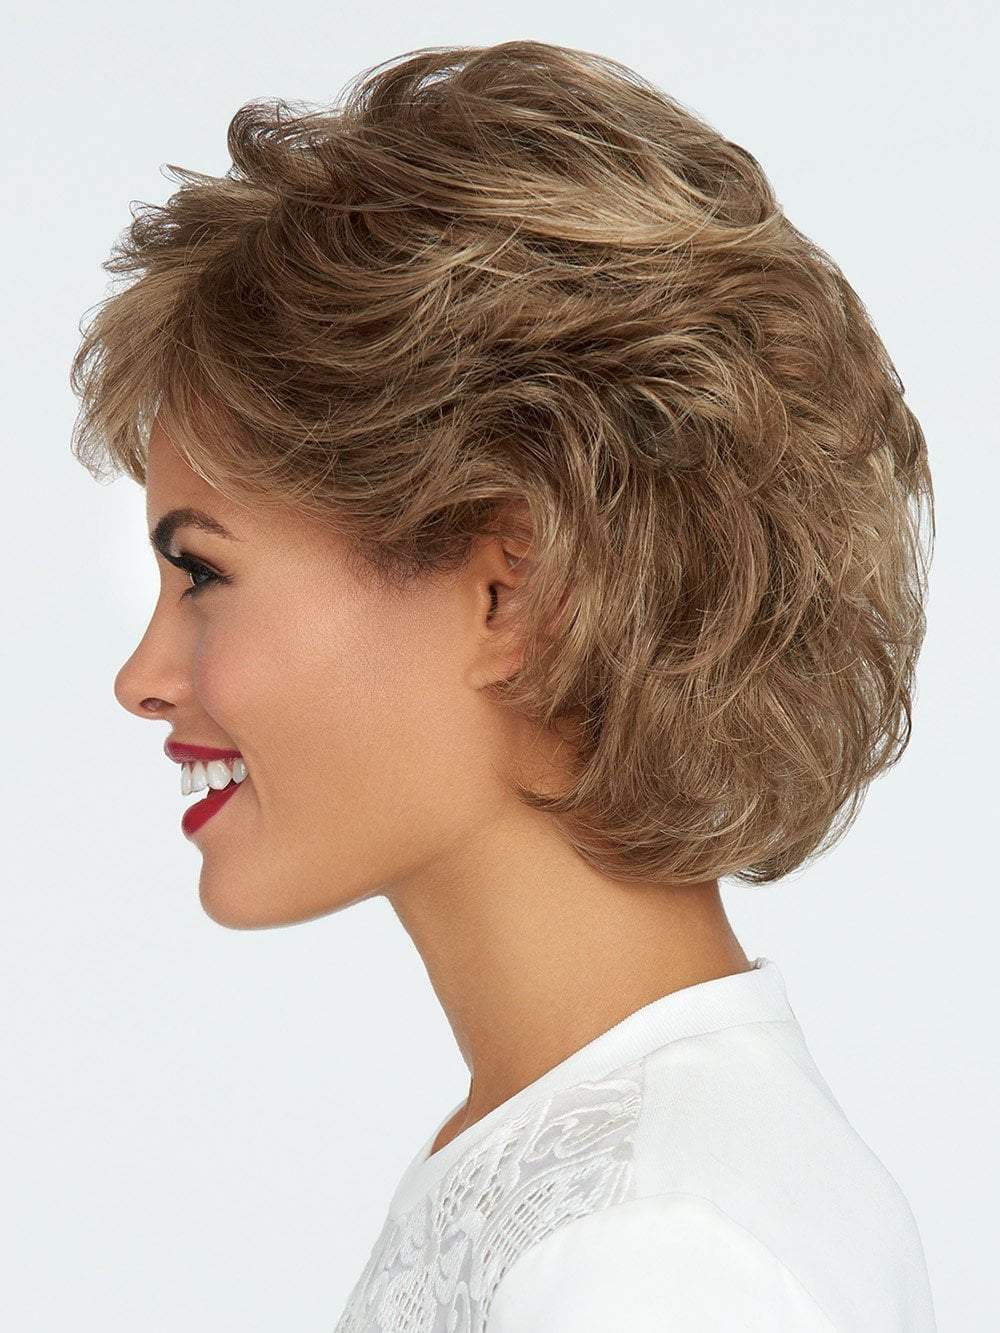 You’ll love its versatility with easy and varied styling options. It offers a Sheer Indulgence™ monofilament top that creates the appearance of natural hair growth and allows for parting versatility – you can part the hair in any direction!